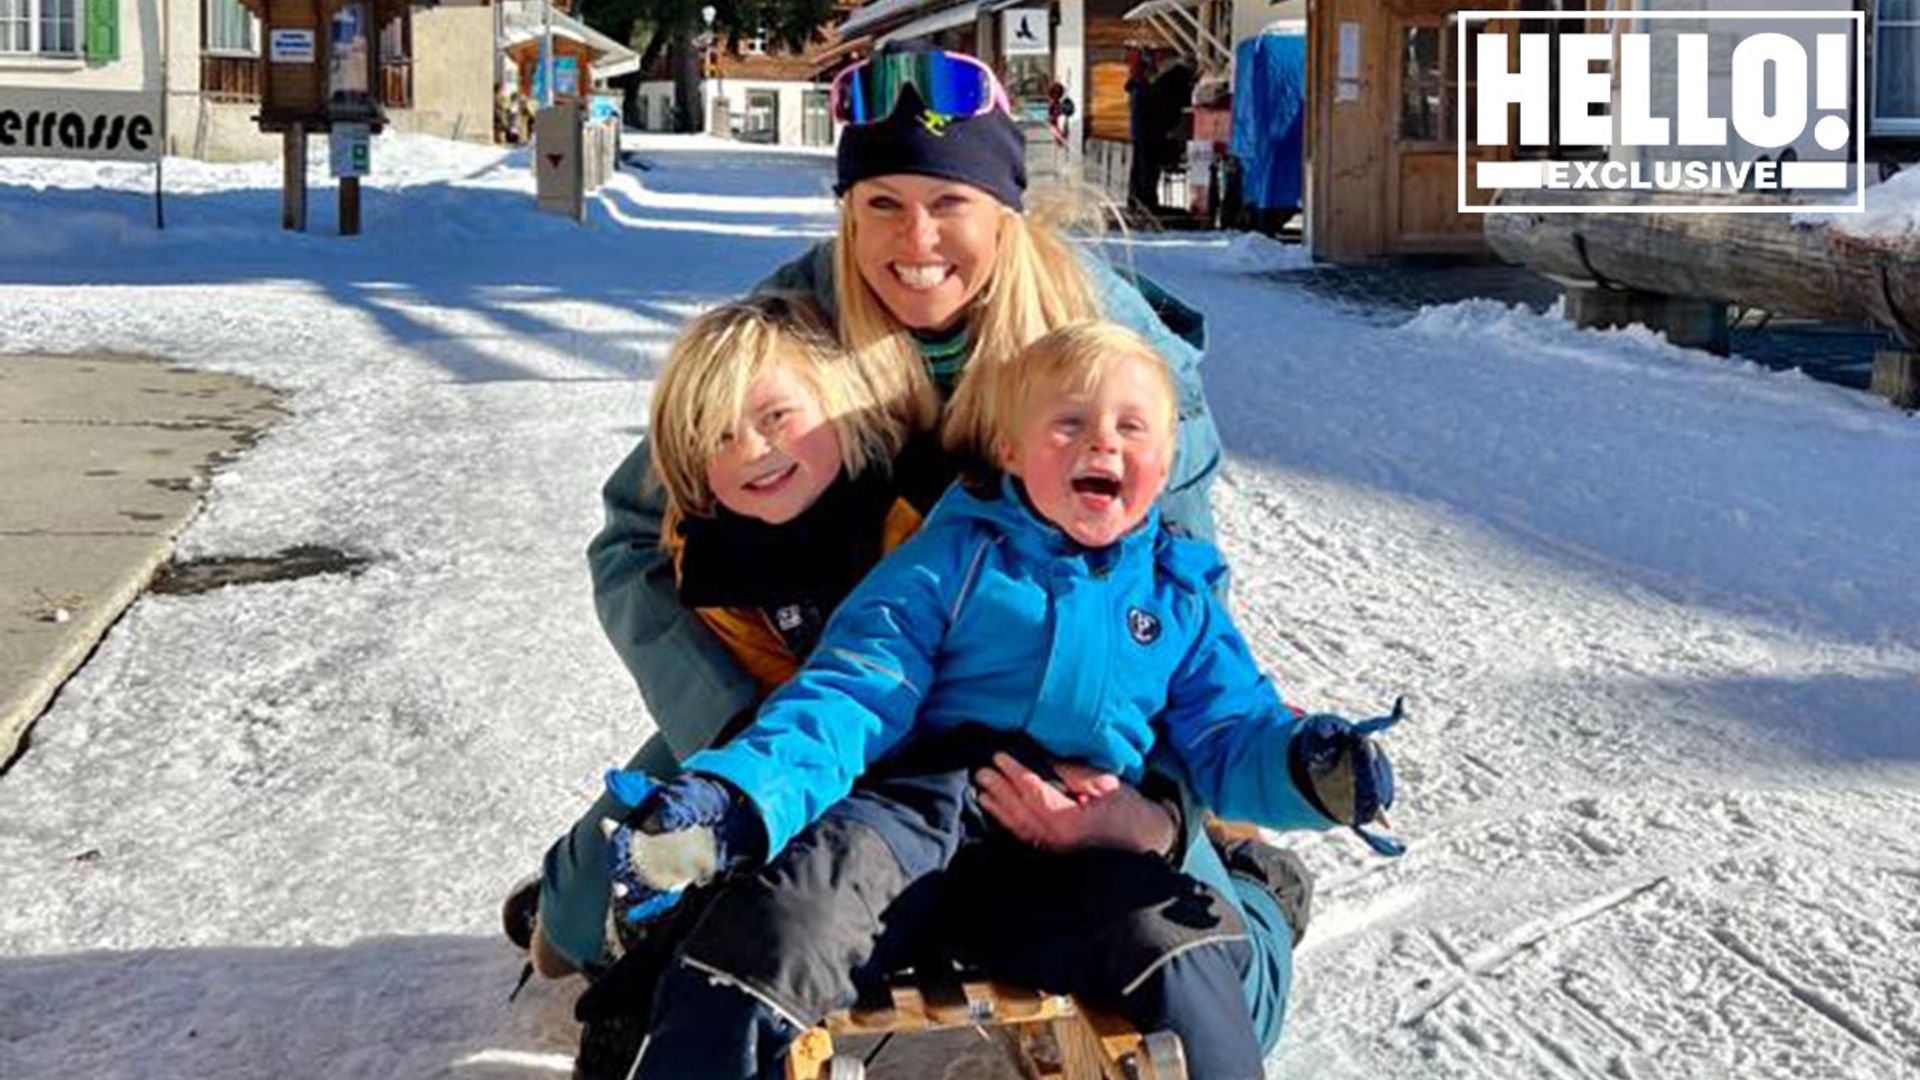 Exclusive: Chemmy Alcott talks exciting family adventure in the mountains with her young sons